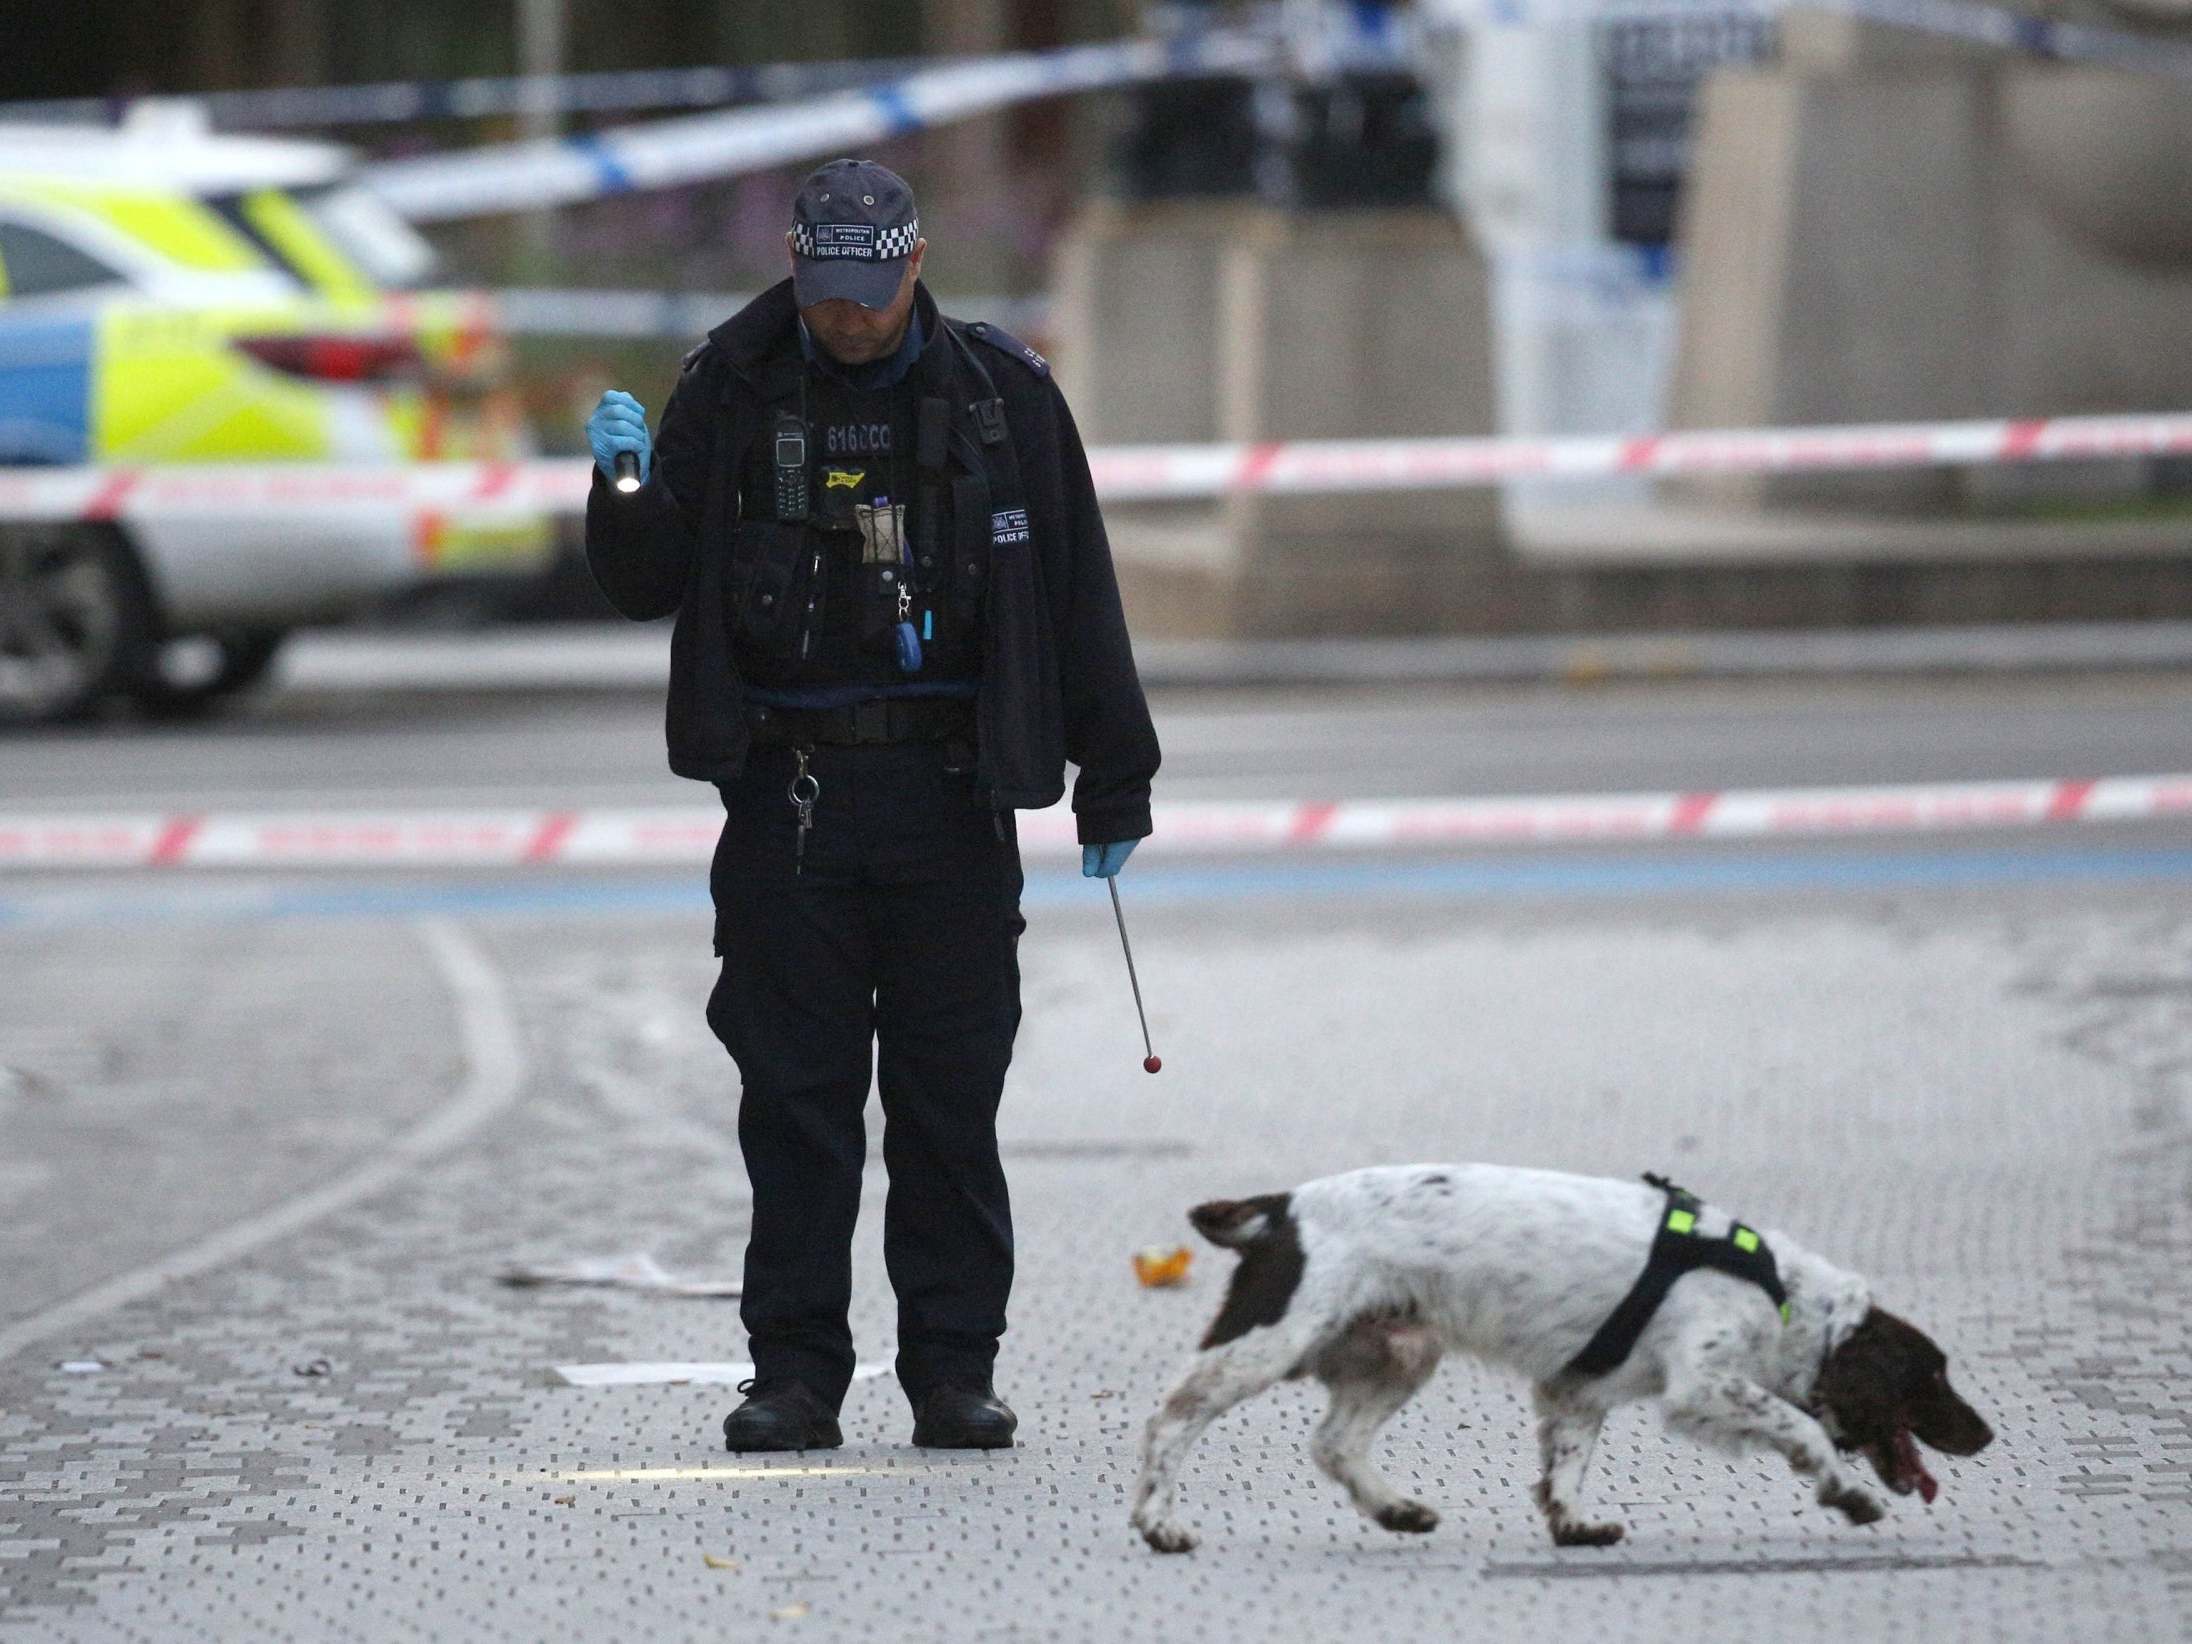 Police at the scene of a stabbing hours earlier at Stratford, east London, on October, 2019.